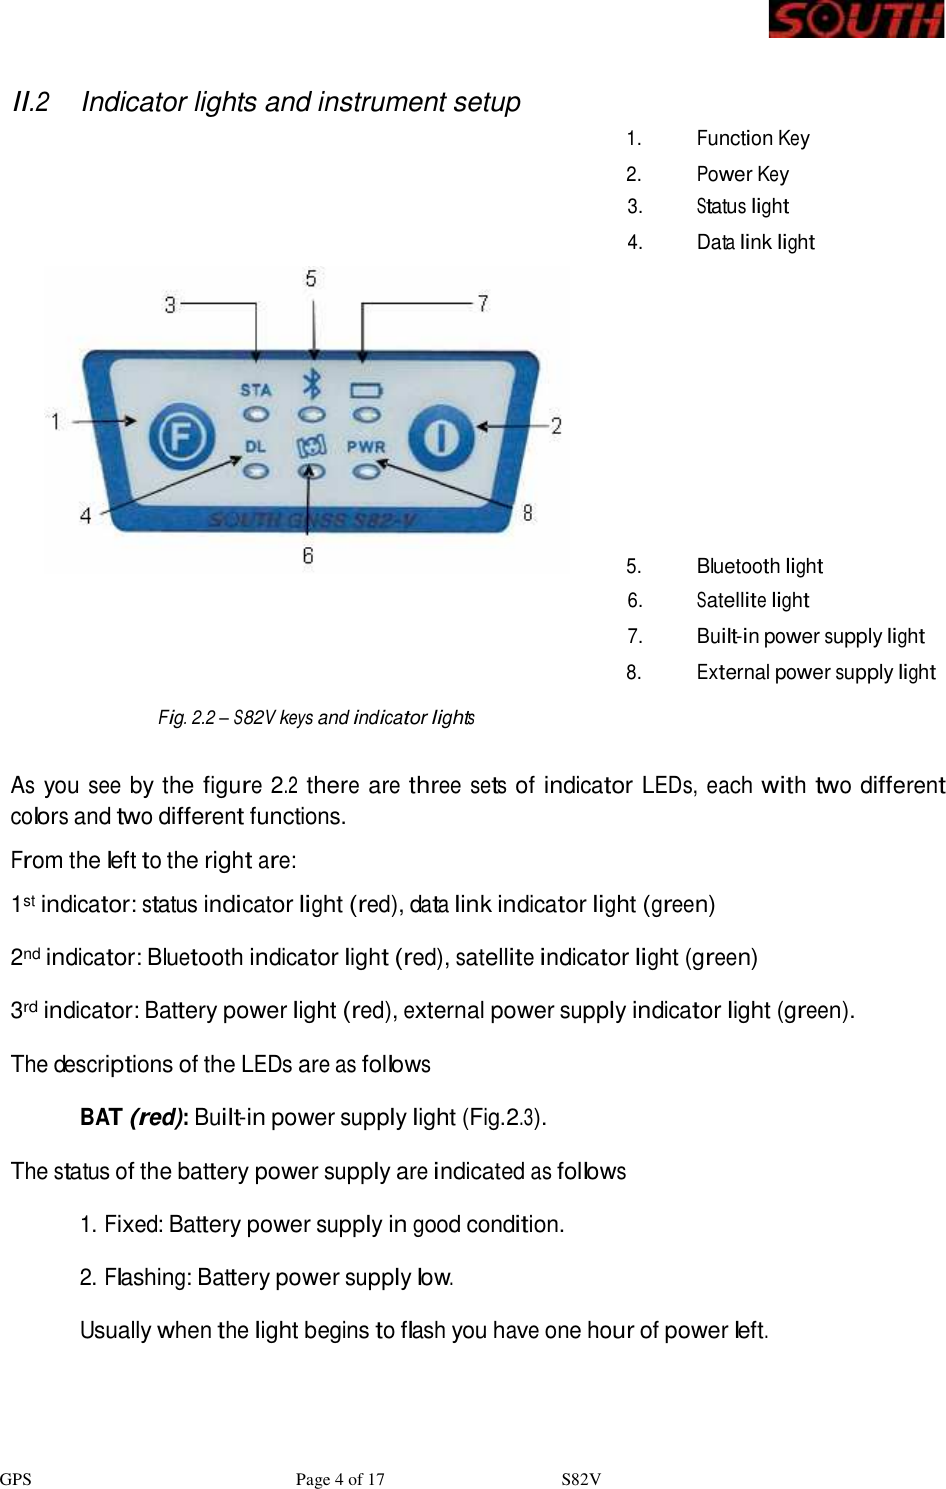 GPS                              Page 4 of 17                    S82V     II.2 Indicator lights and instrument setup   1. Function Key    2. Power Key 3. Status light  4. Data link light   5. Bluetooth light  6. Satellite light  7. Built-in power supply light    8. External power supply light  Fig. 2.2 – S82V keys and indicator lights   As you see by the figure 2.2 there are three sets of indicator LEDs, each with two different colors and two different functions. From the left to the right are: 1st indicator: status indicator light (red), data link indicator light (green)  2nd indicator: Bluetooth indicator light (red), satellite indicator light (green)  3rd indicator: Battery power light (red), external power supply indicator light (green). The descriptions of the LEDs are as follows BAT (red): Built-in power supply light (Fig.2.3).  The status of the battery power supply are indicated as follows  1. Fixed: Battery power supply in good condition.  2. Flashing: Battery power supply low.  Usually when the light begins to flash you have one hour of power left.  